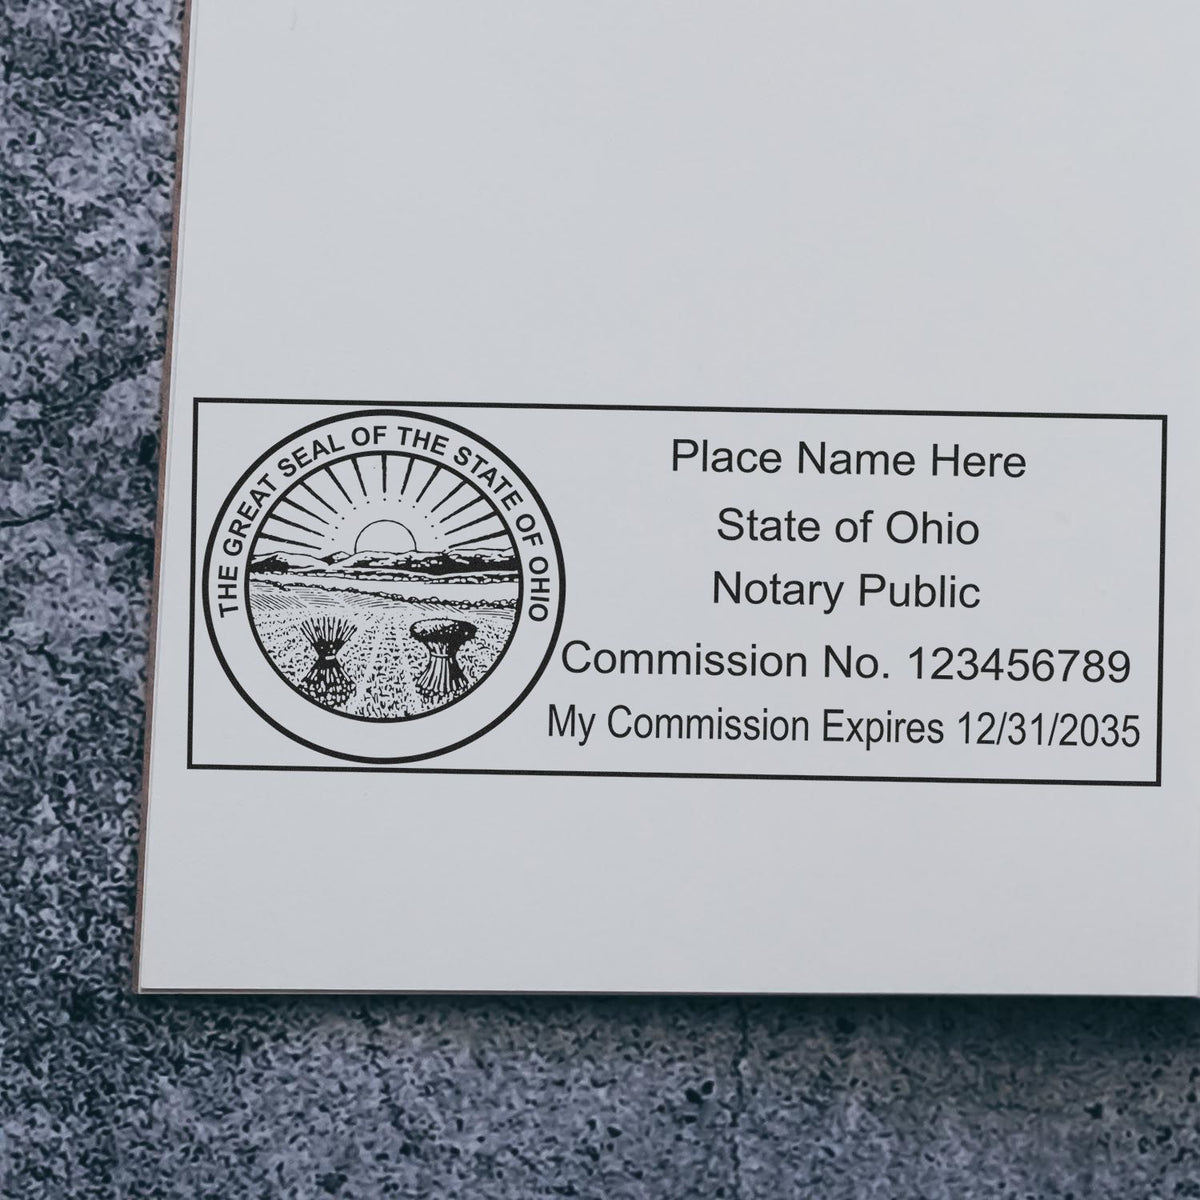 Another Example of a stamped impression of the Heavy-Duty Ohio Rectangular Notary Stamp on a piece of office paper.